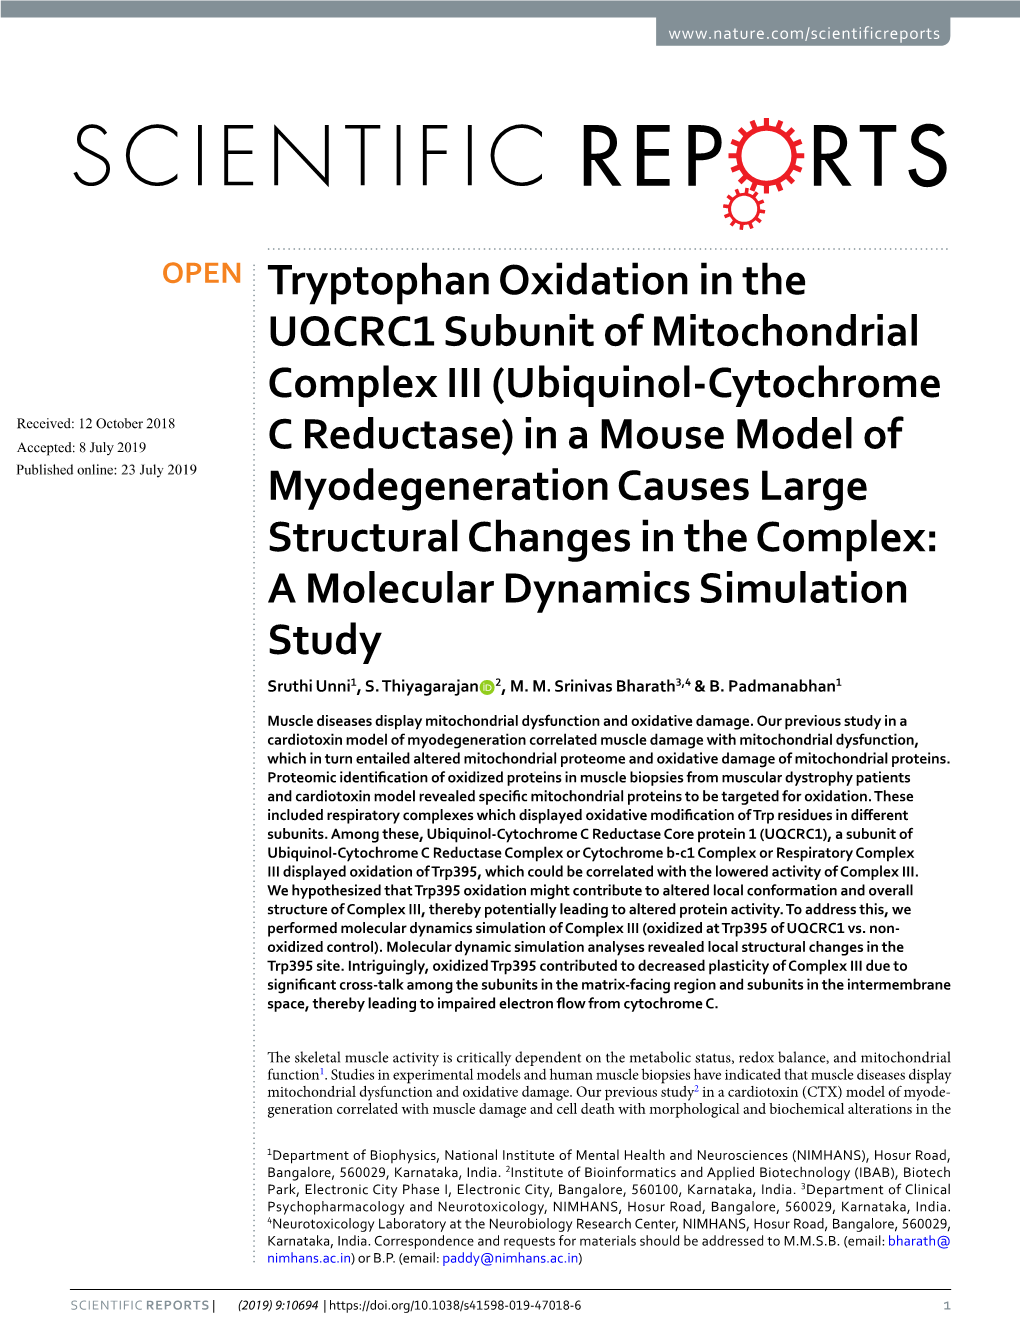 Tryptophan Oxidation in the UQCRC1 Subunit of Mitochondrial Complex